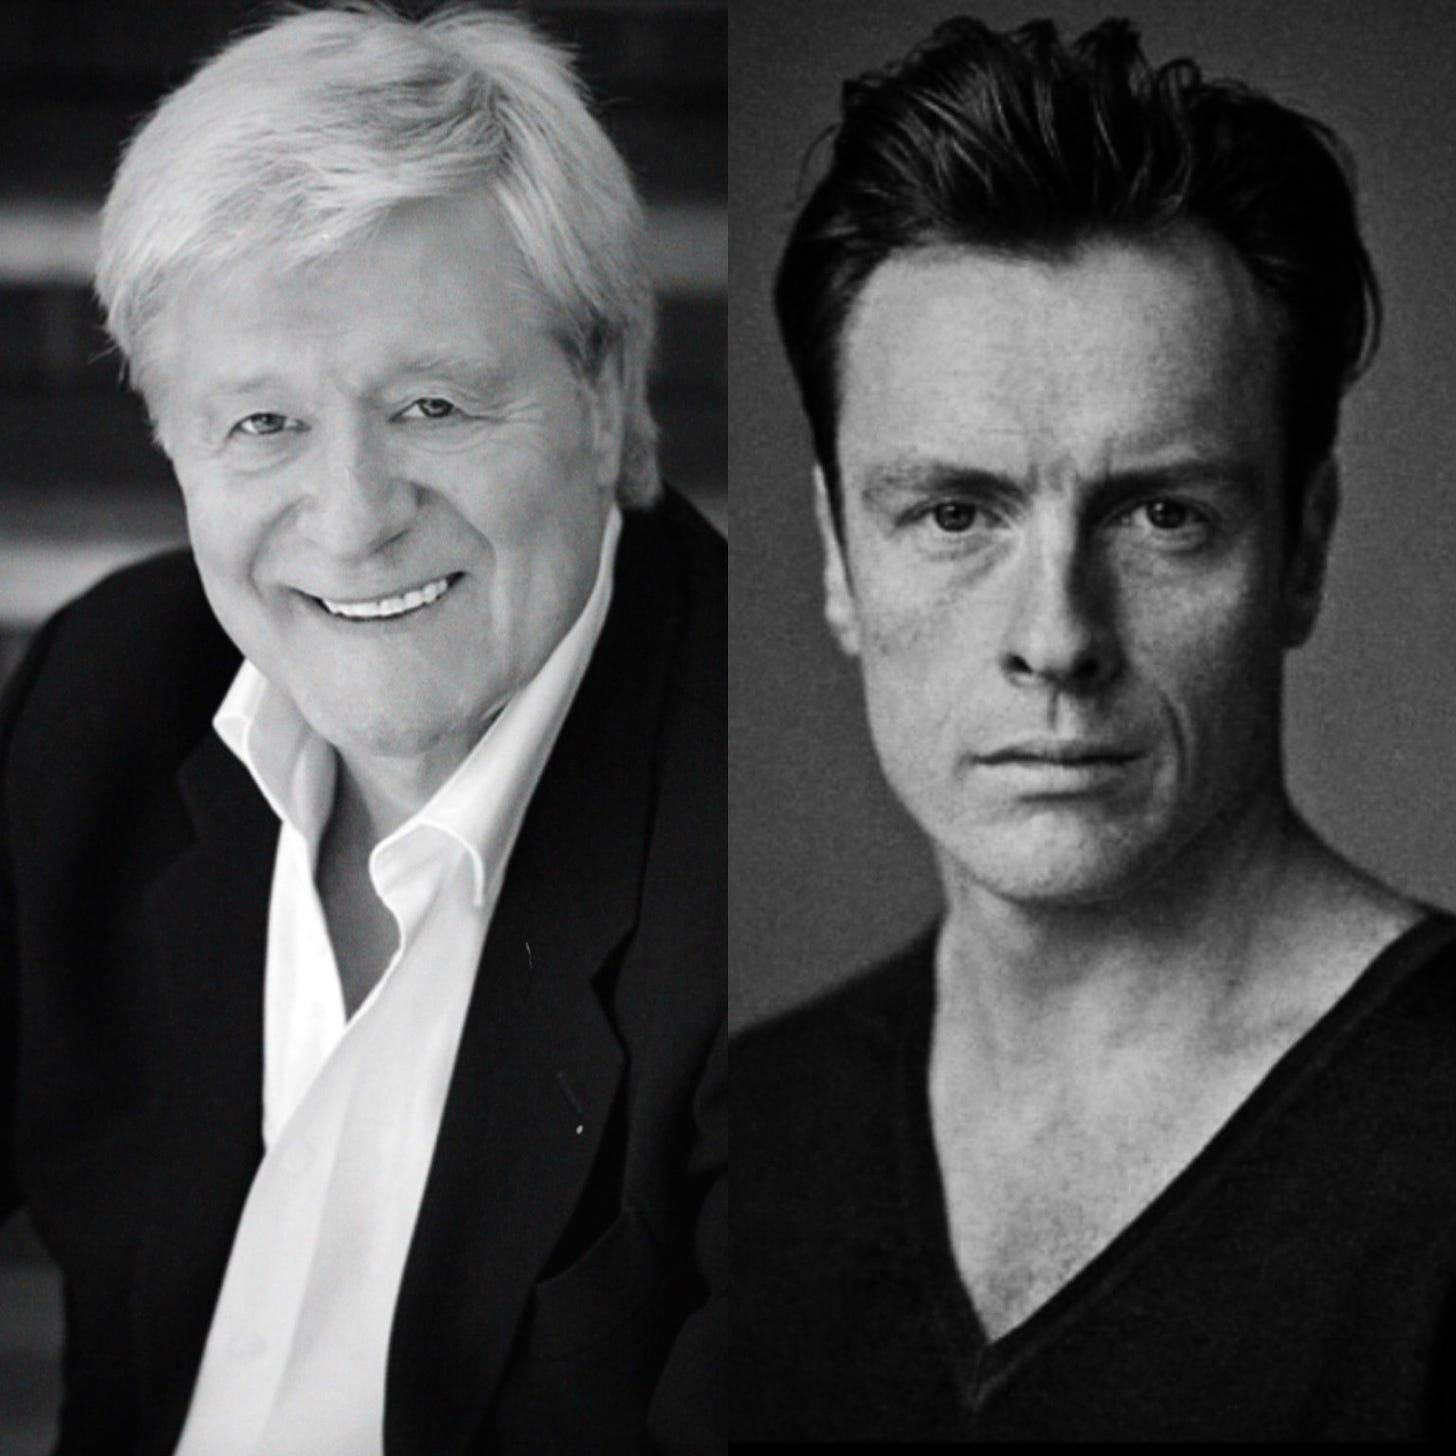 Martin Jarvis and Toby Stephens